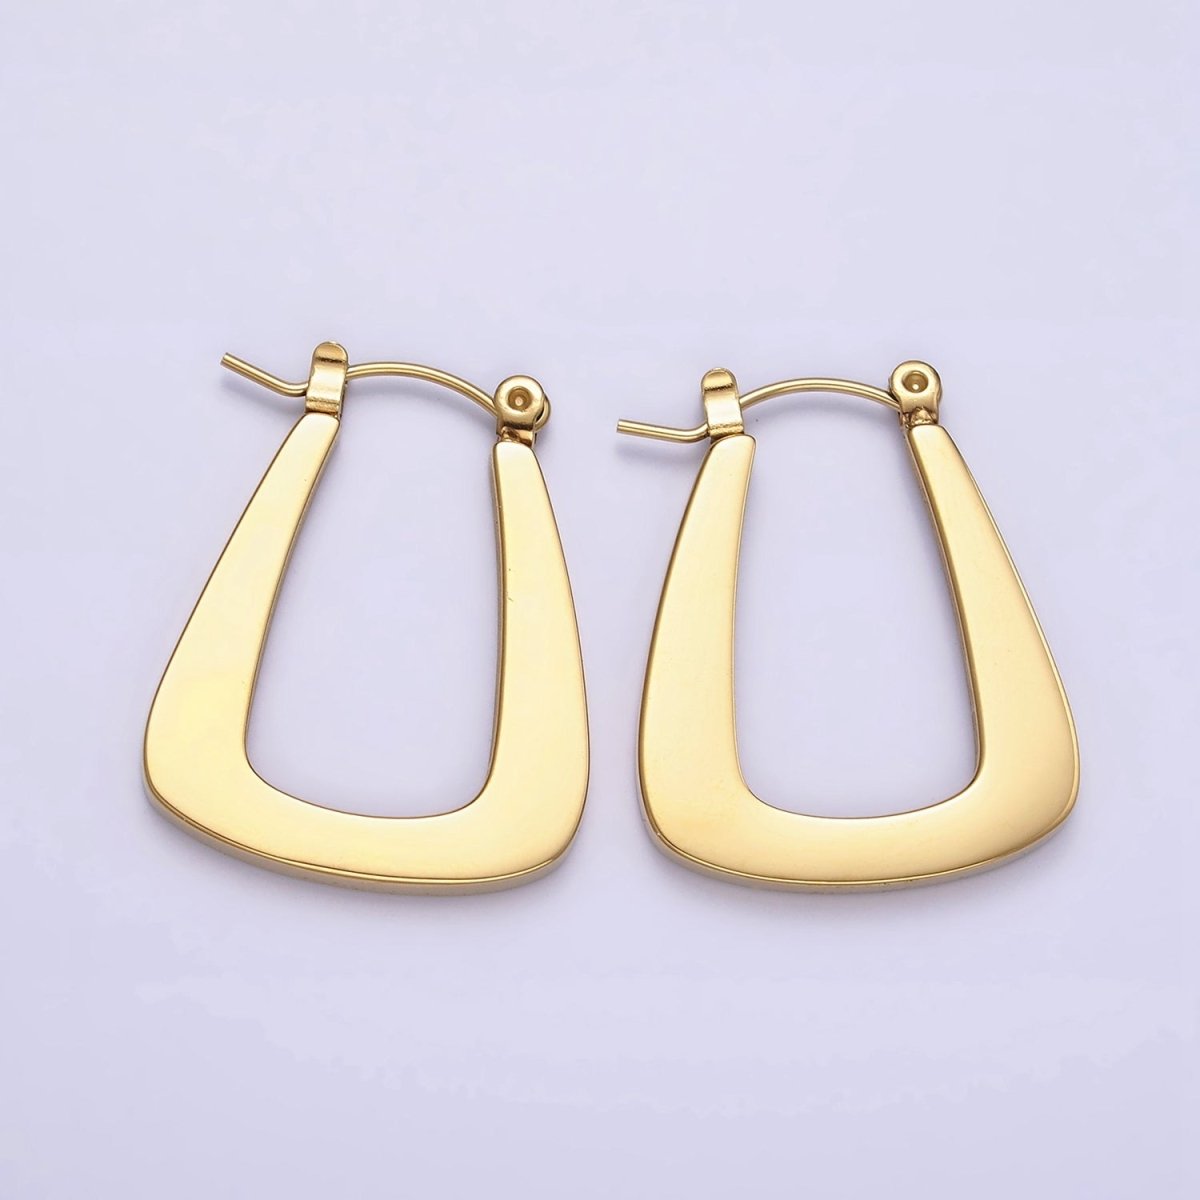 Stainless Steel 25mm Triangle Curved U-Shaped Latch Earrings in Silver & Gold | AE863 AE864 - DLUXCA